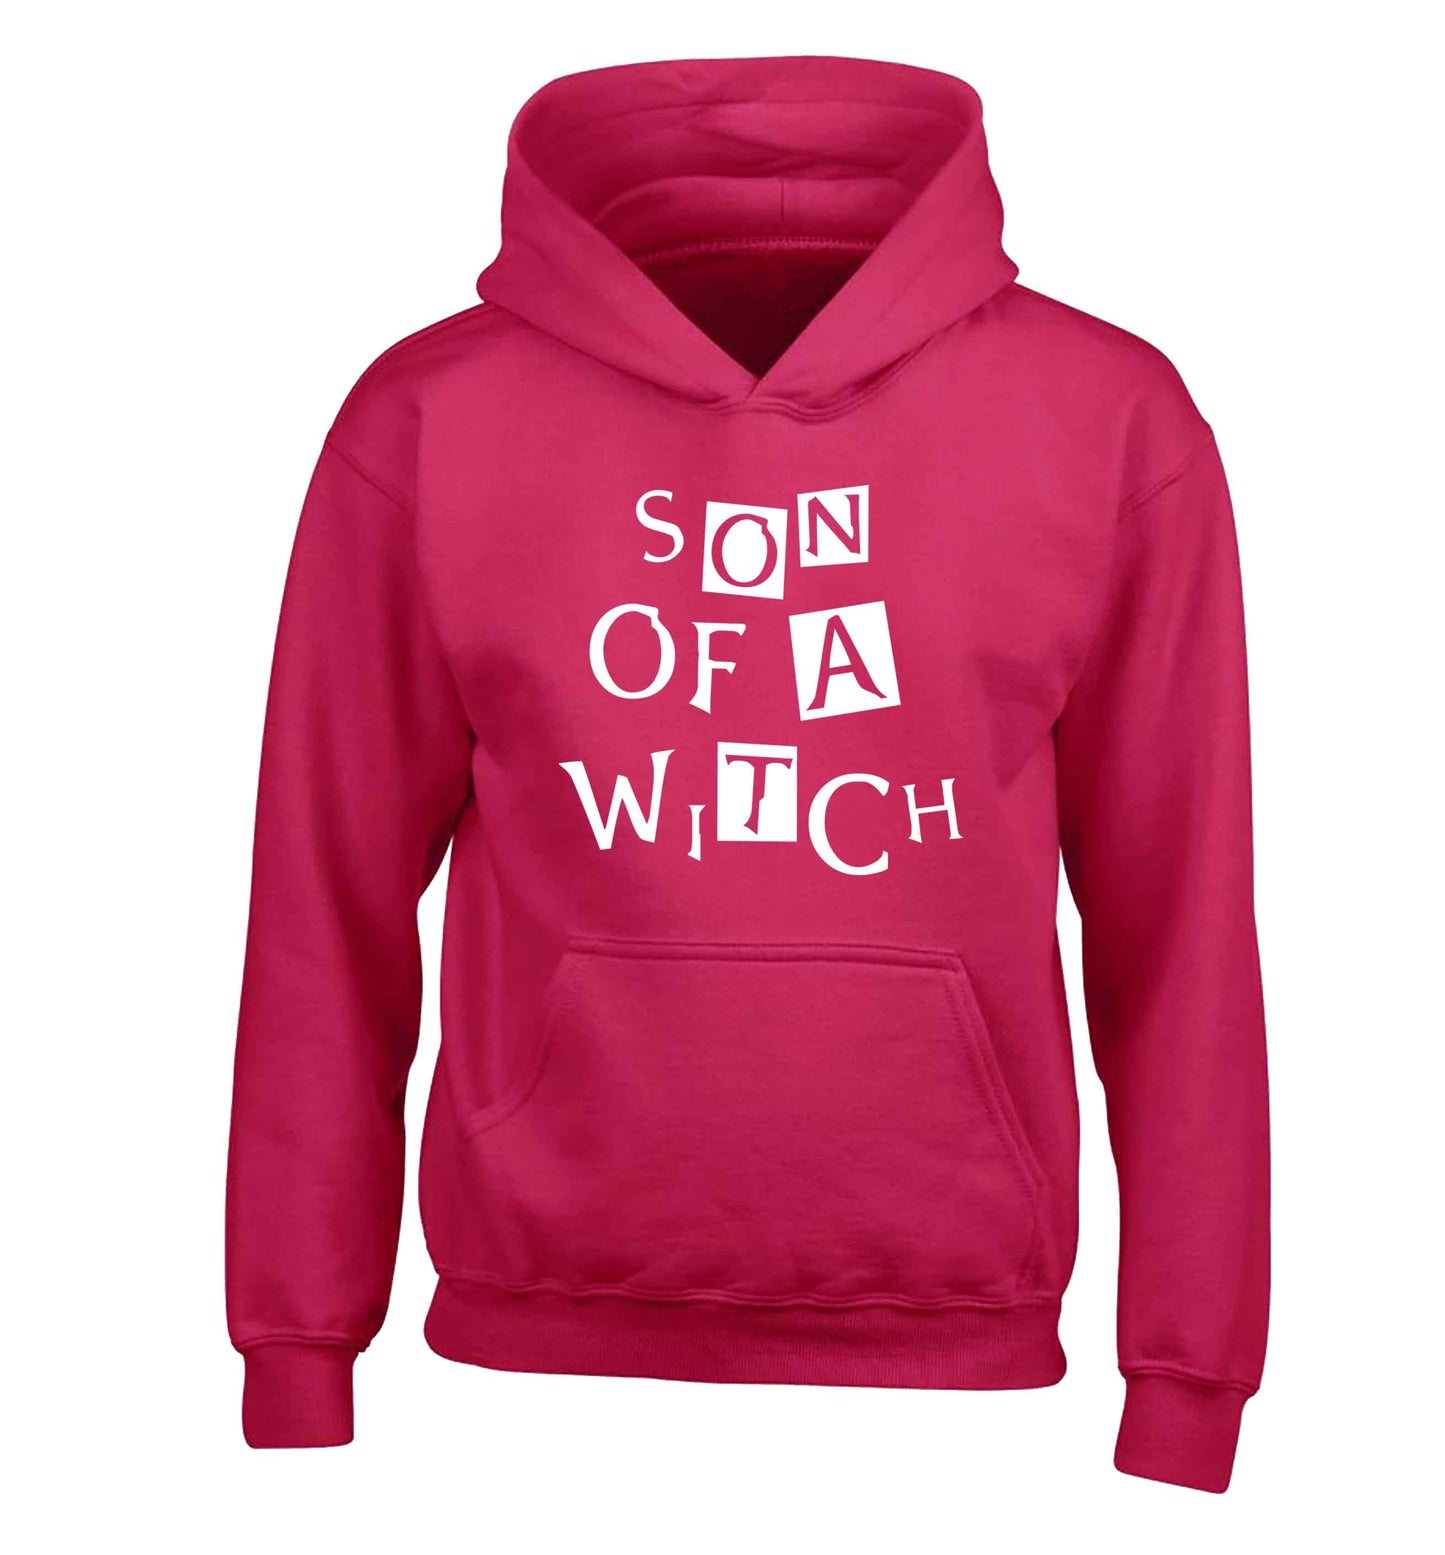 Son of a witch children's pink hoodie 12-13 Years